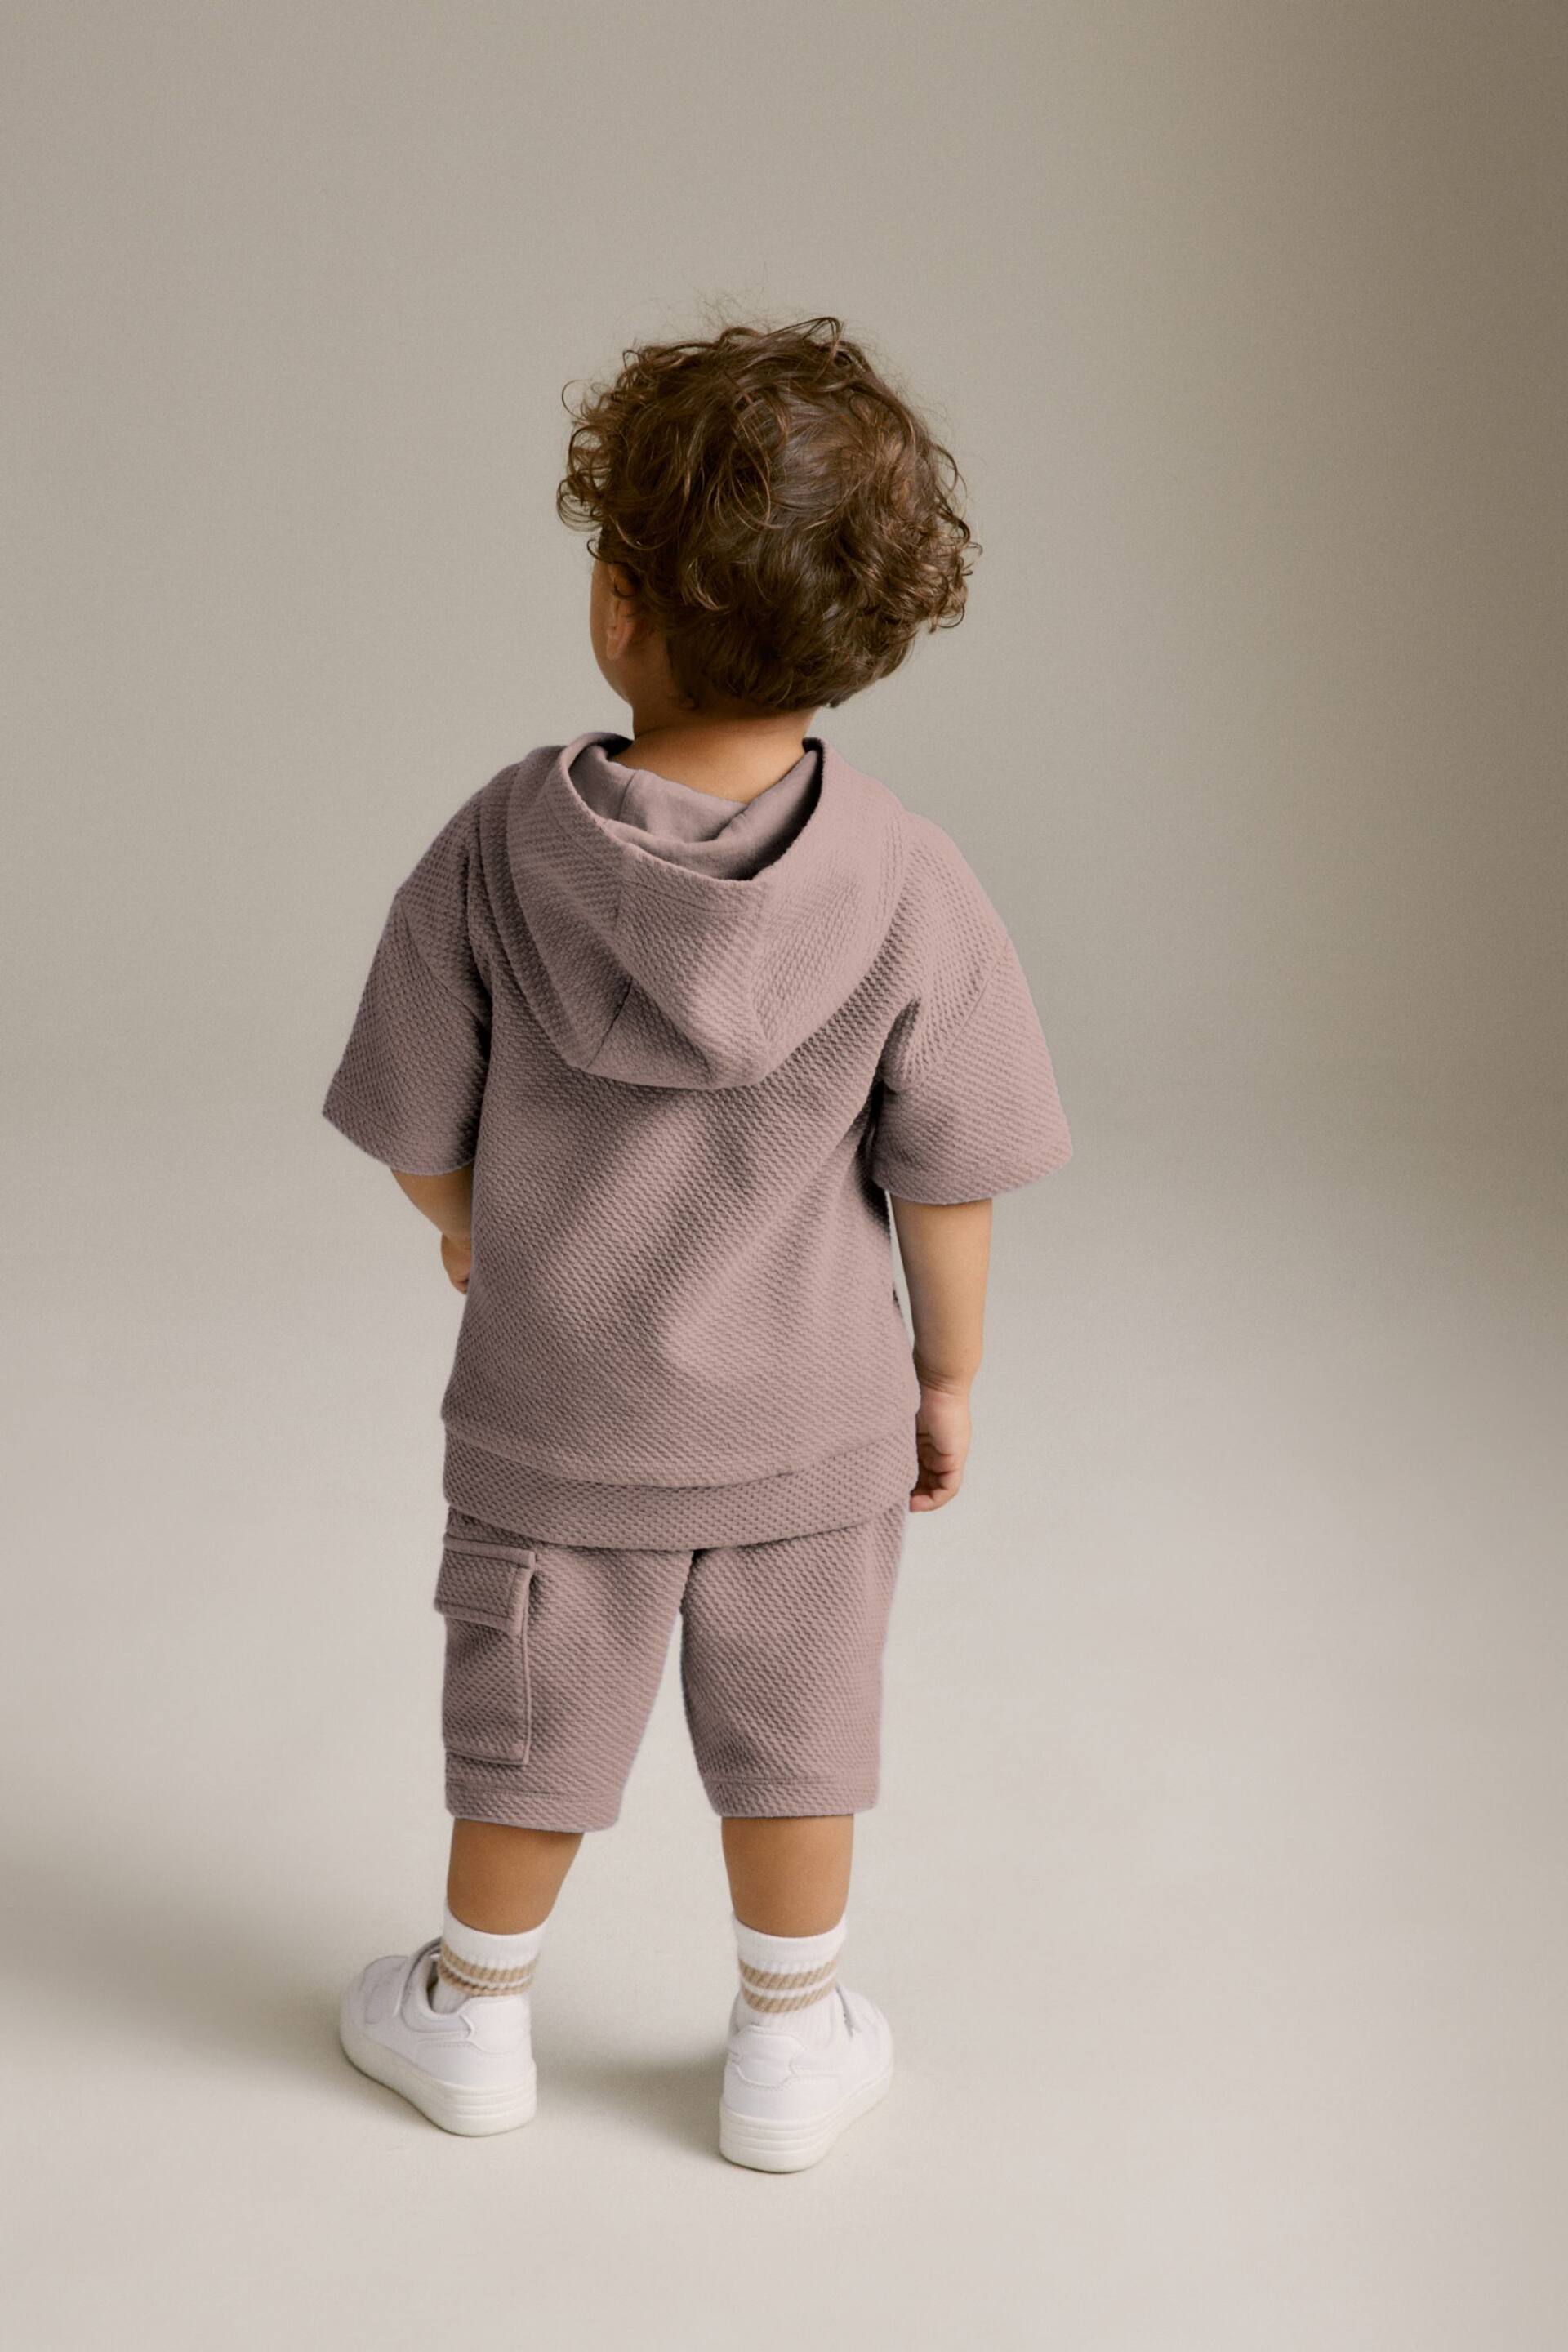 Tan Brown Short Sleeve Textured Hoodie and Shorts Set (3mths-7yrs) - Image 4 of 8